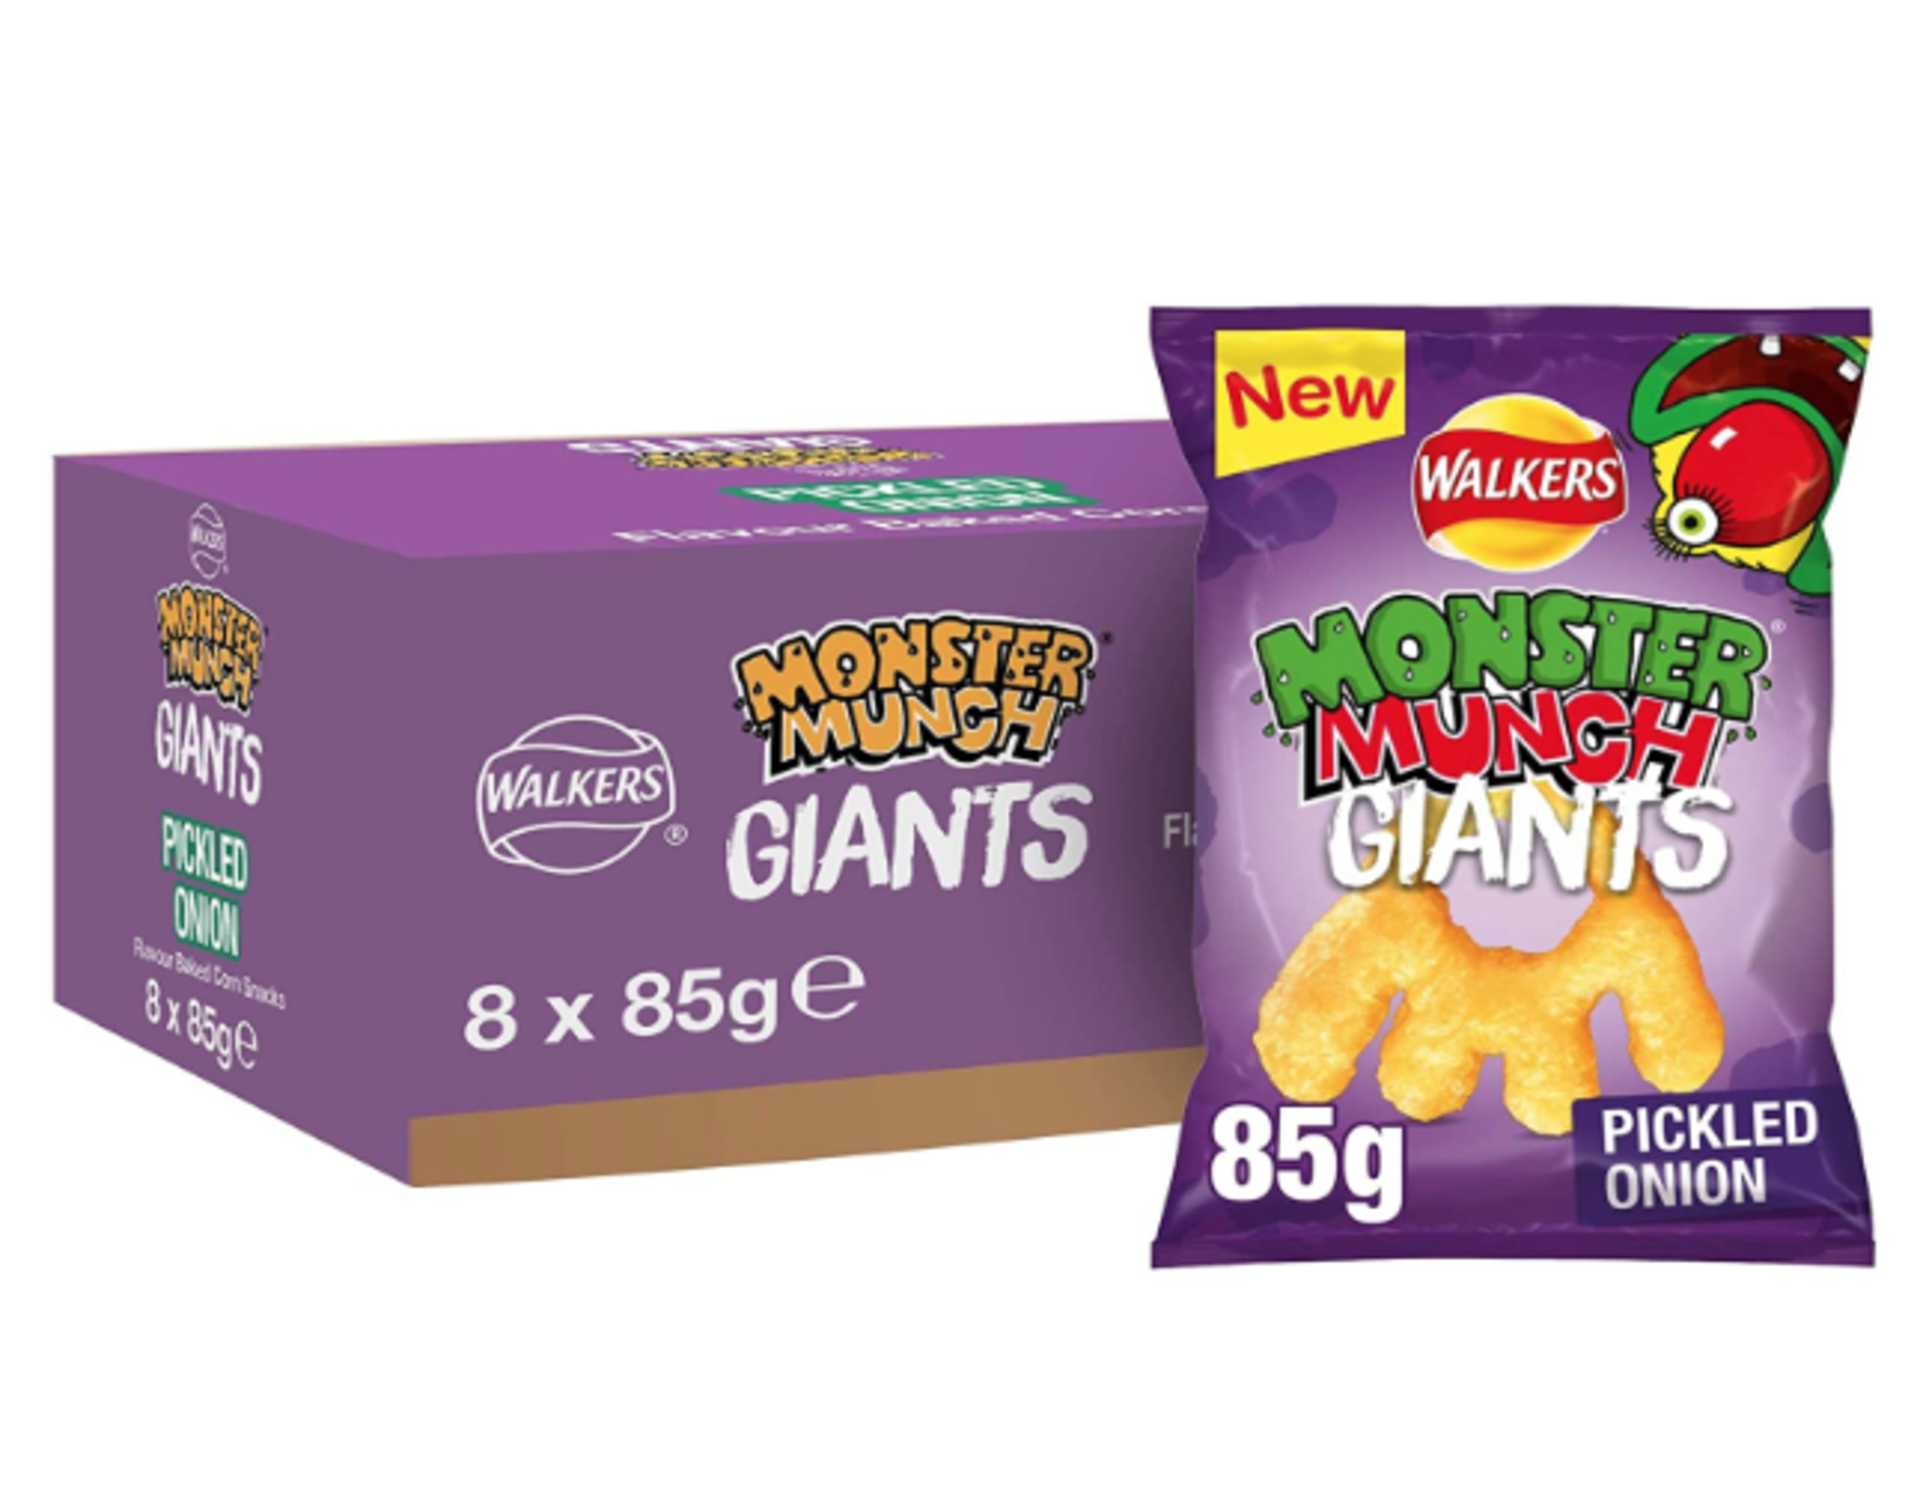 **RRP £749 (approx count 59) spSBG21c47F  17 x Walkers Monster Munch Giants Pickled Onion 85g (